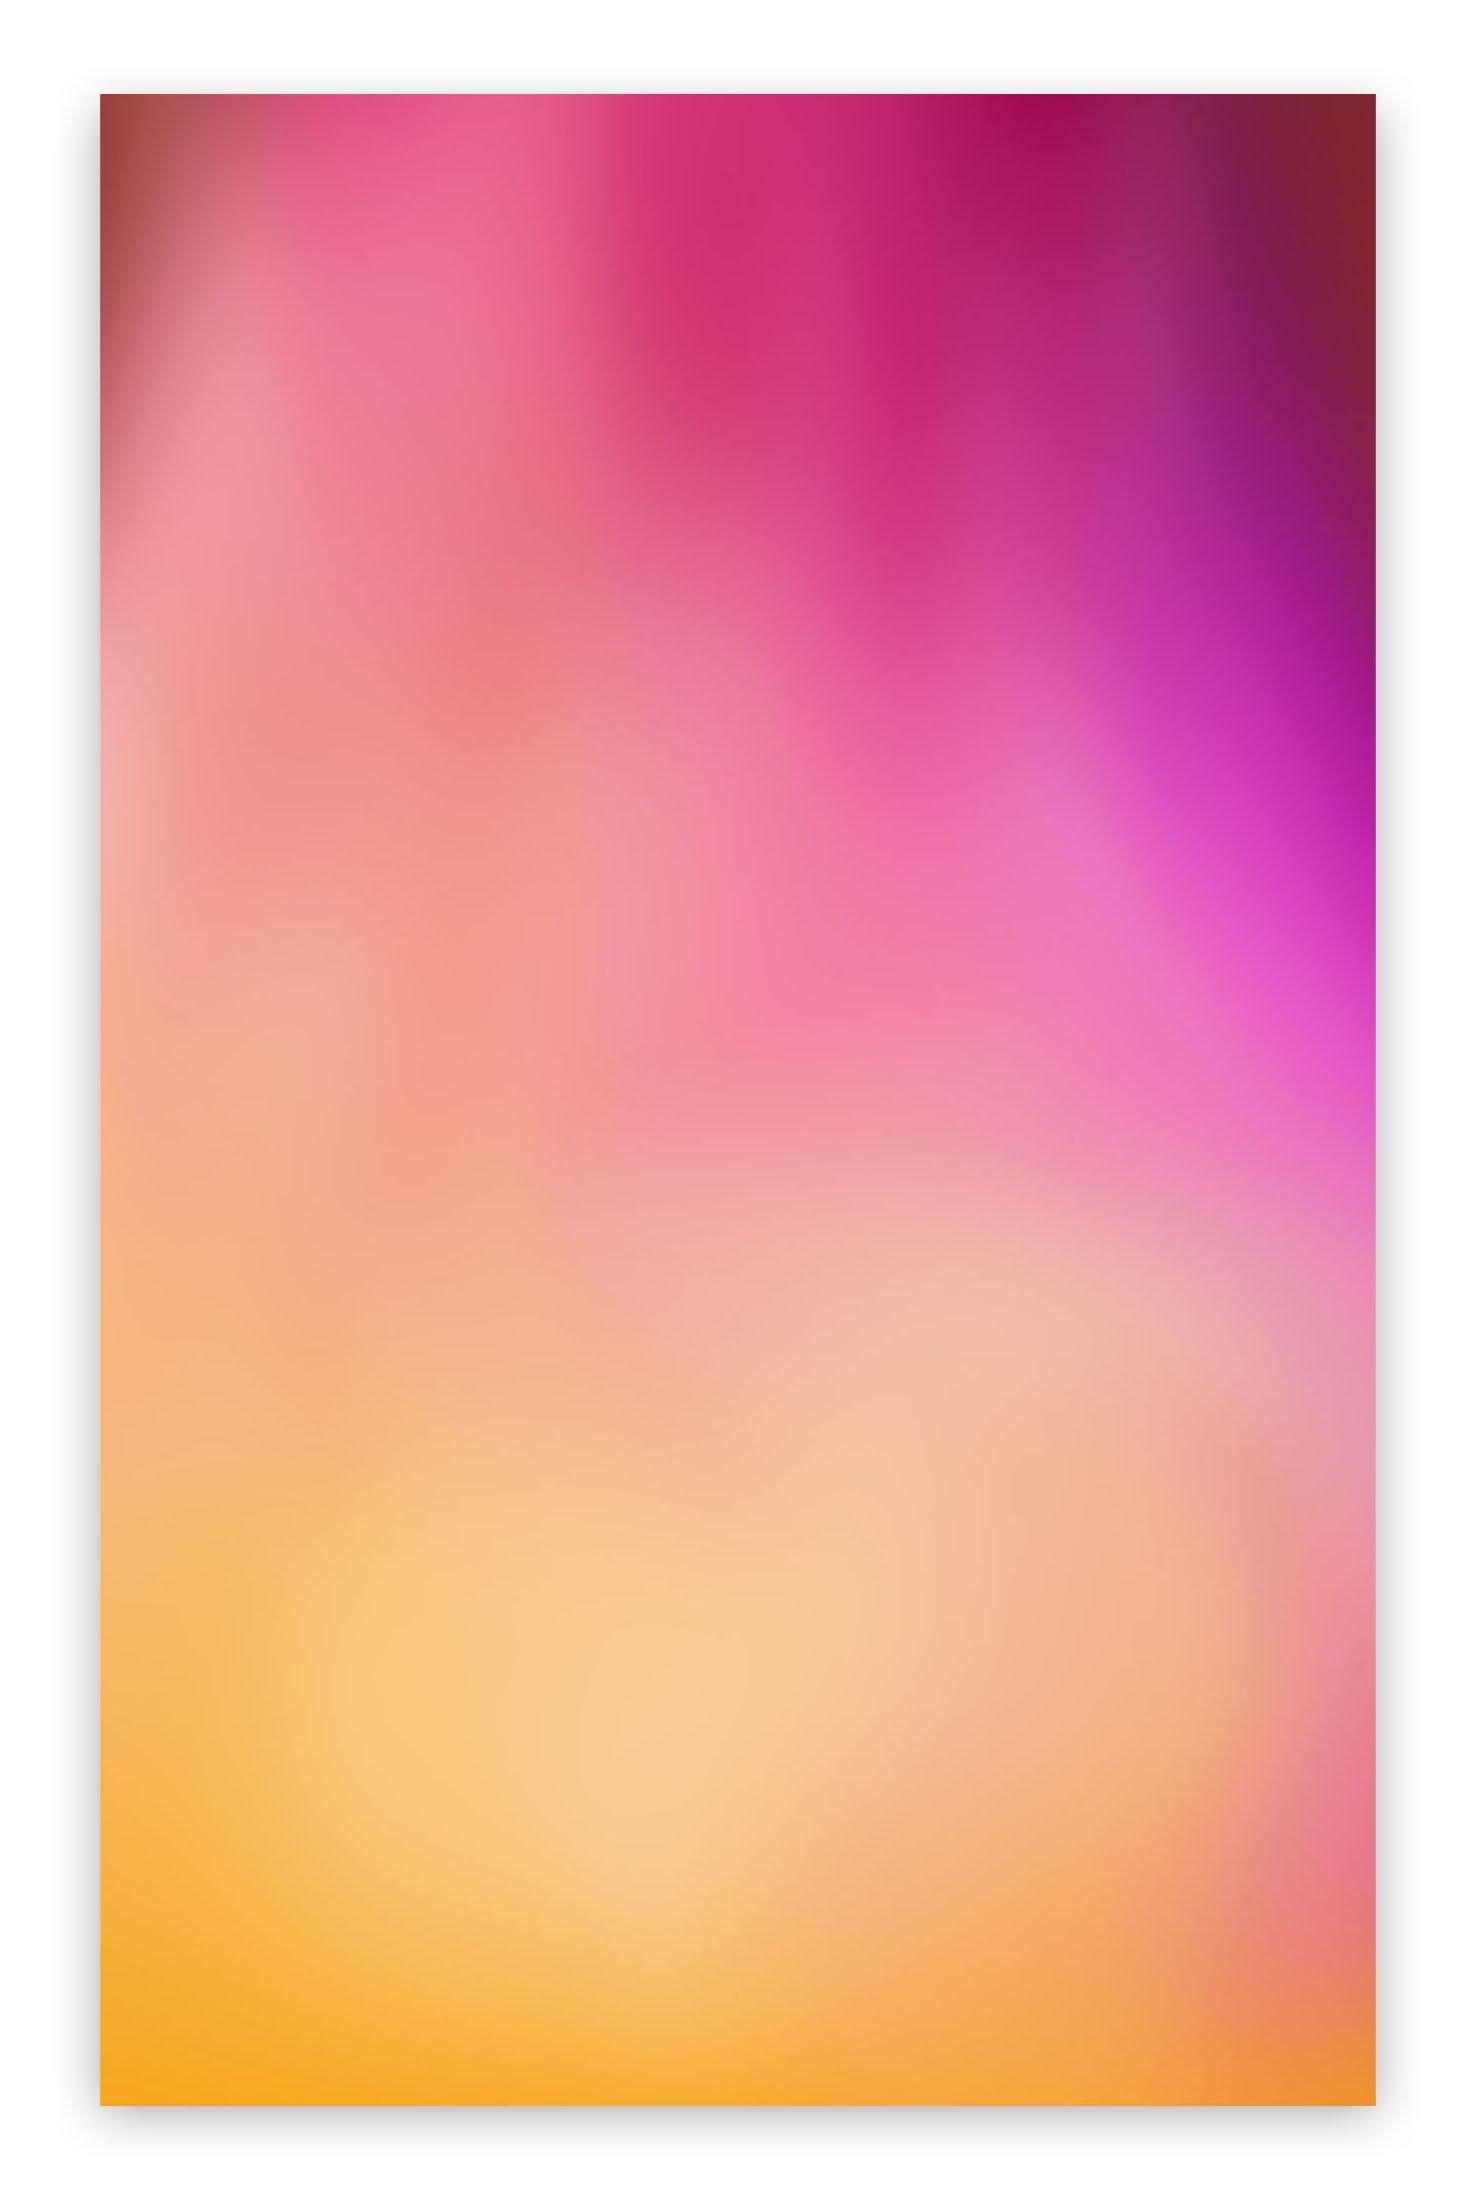 Bleed # 202172 (Abstract Photography)

Chromogenic Print Face-mounted 3mm Matte Plexiglas - Unframed.

Backed with Dibond and C-channel hanging system + keyhole option. 
Available on request 5-6 week turnaround.
Edition 2/3. 

Snell creates small